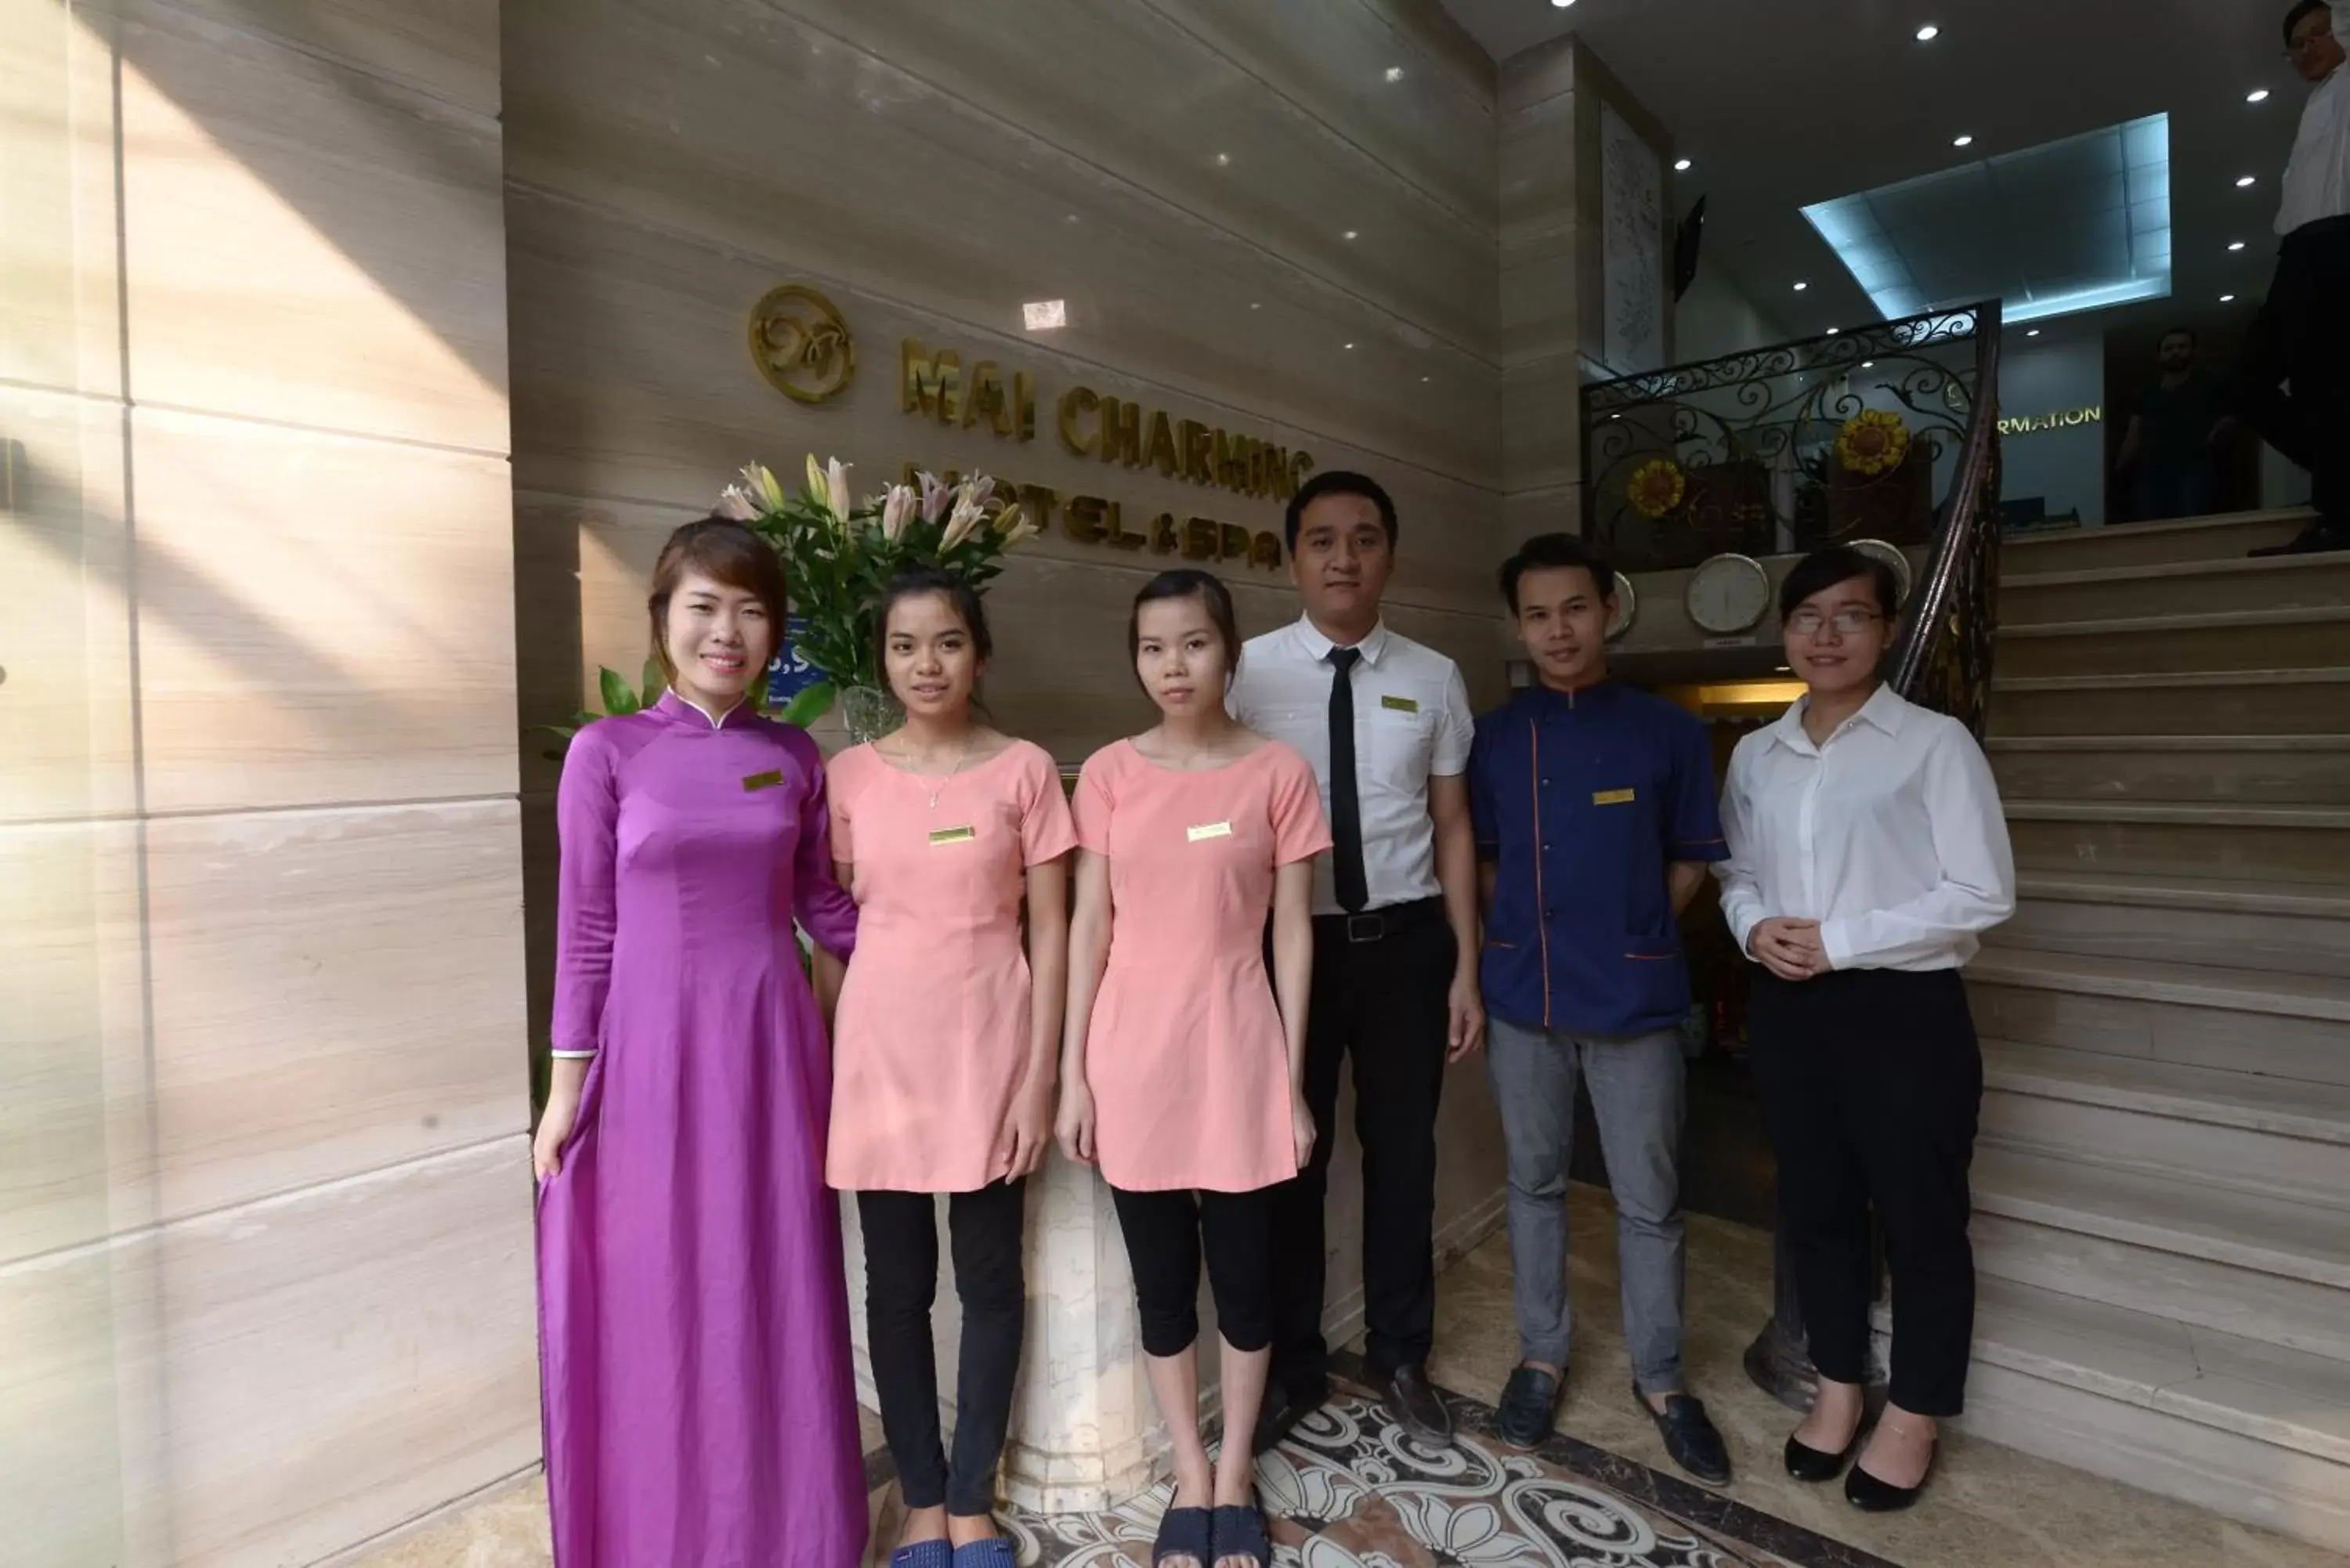 Staff in Mai Charming Hotel and Spa